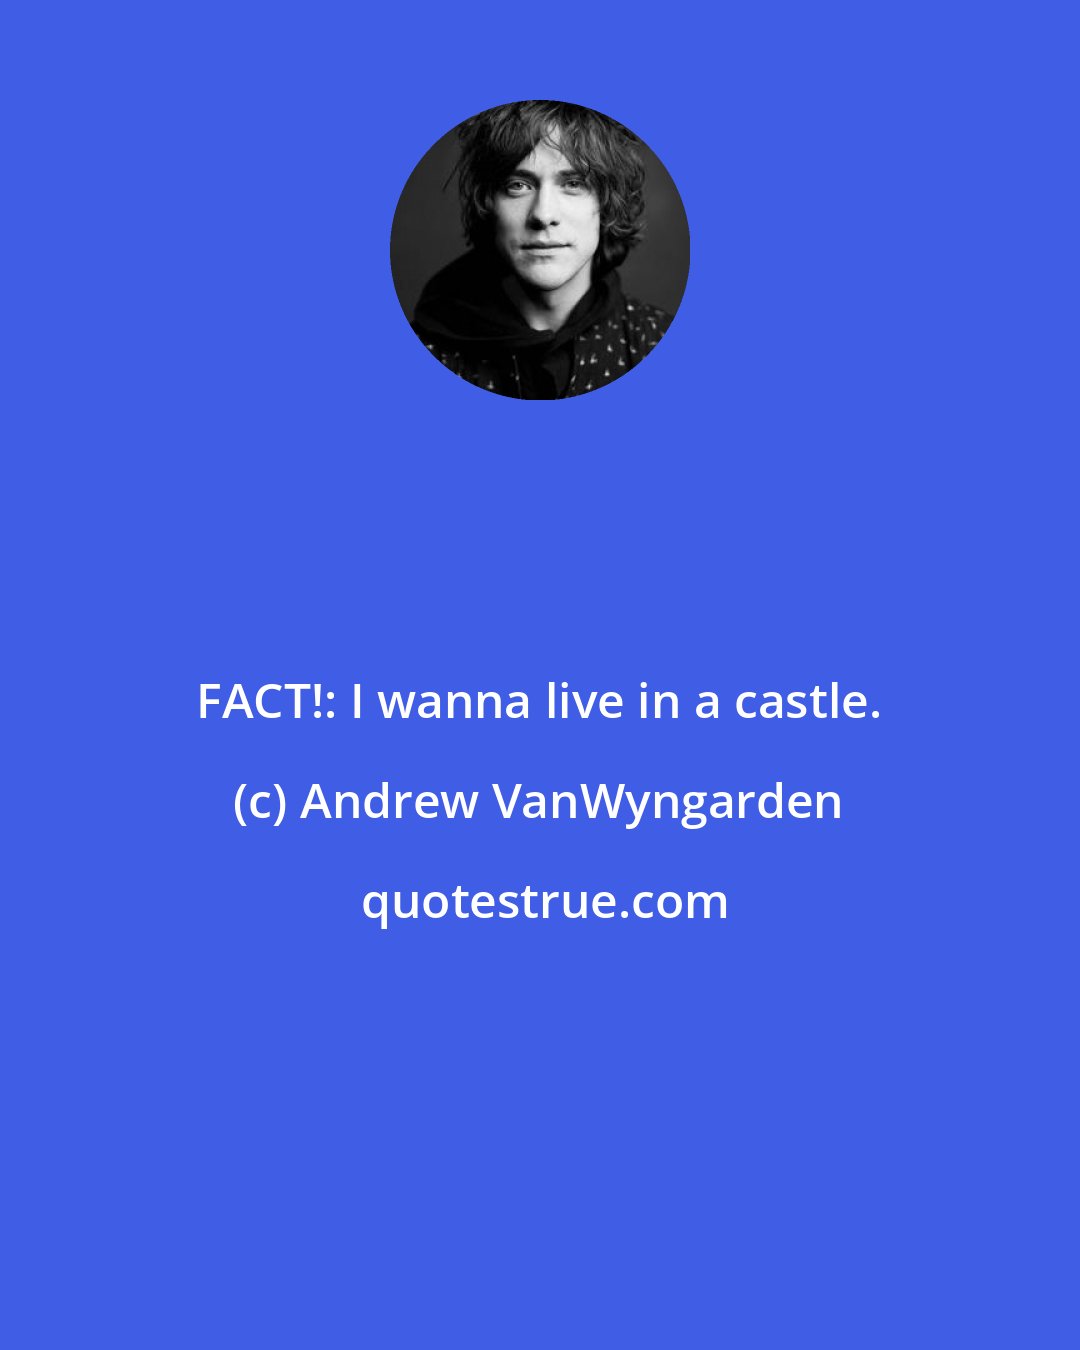 Andrew VanWyngarden: FACT!: I wanna live in a castle.